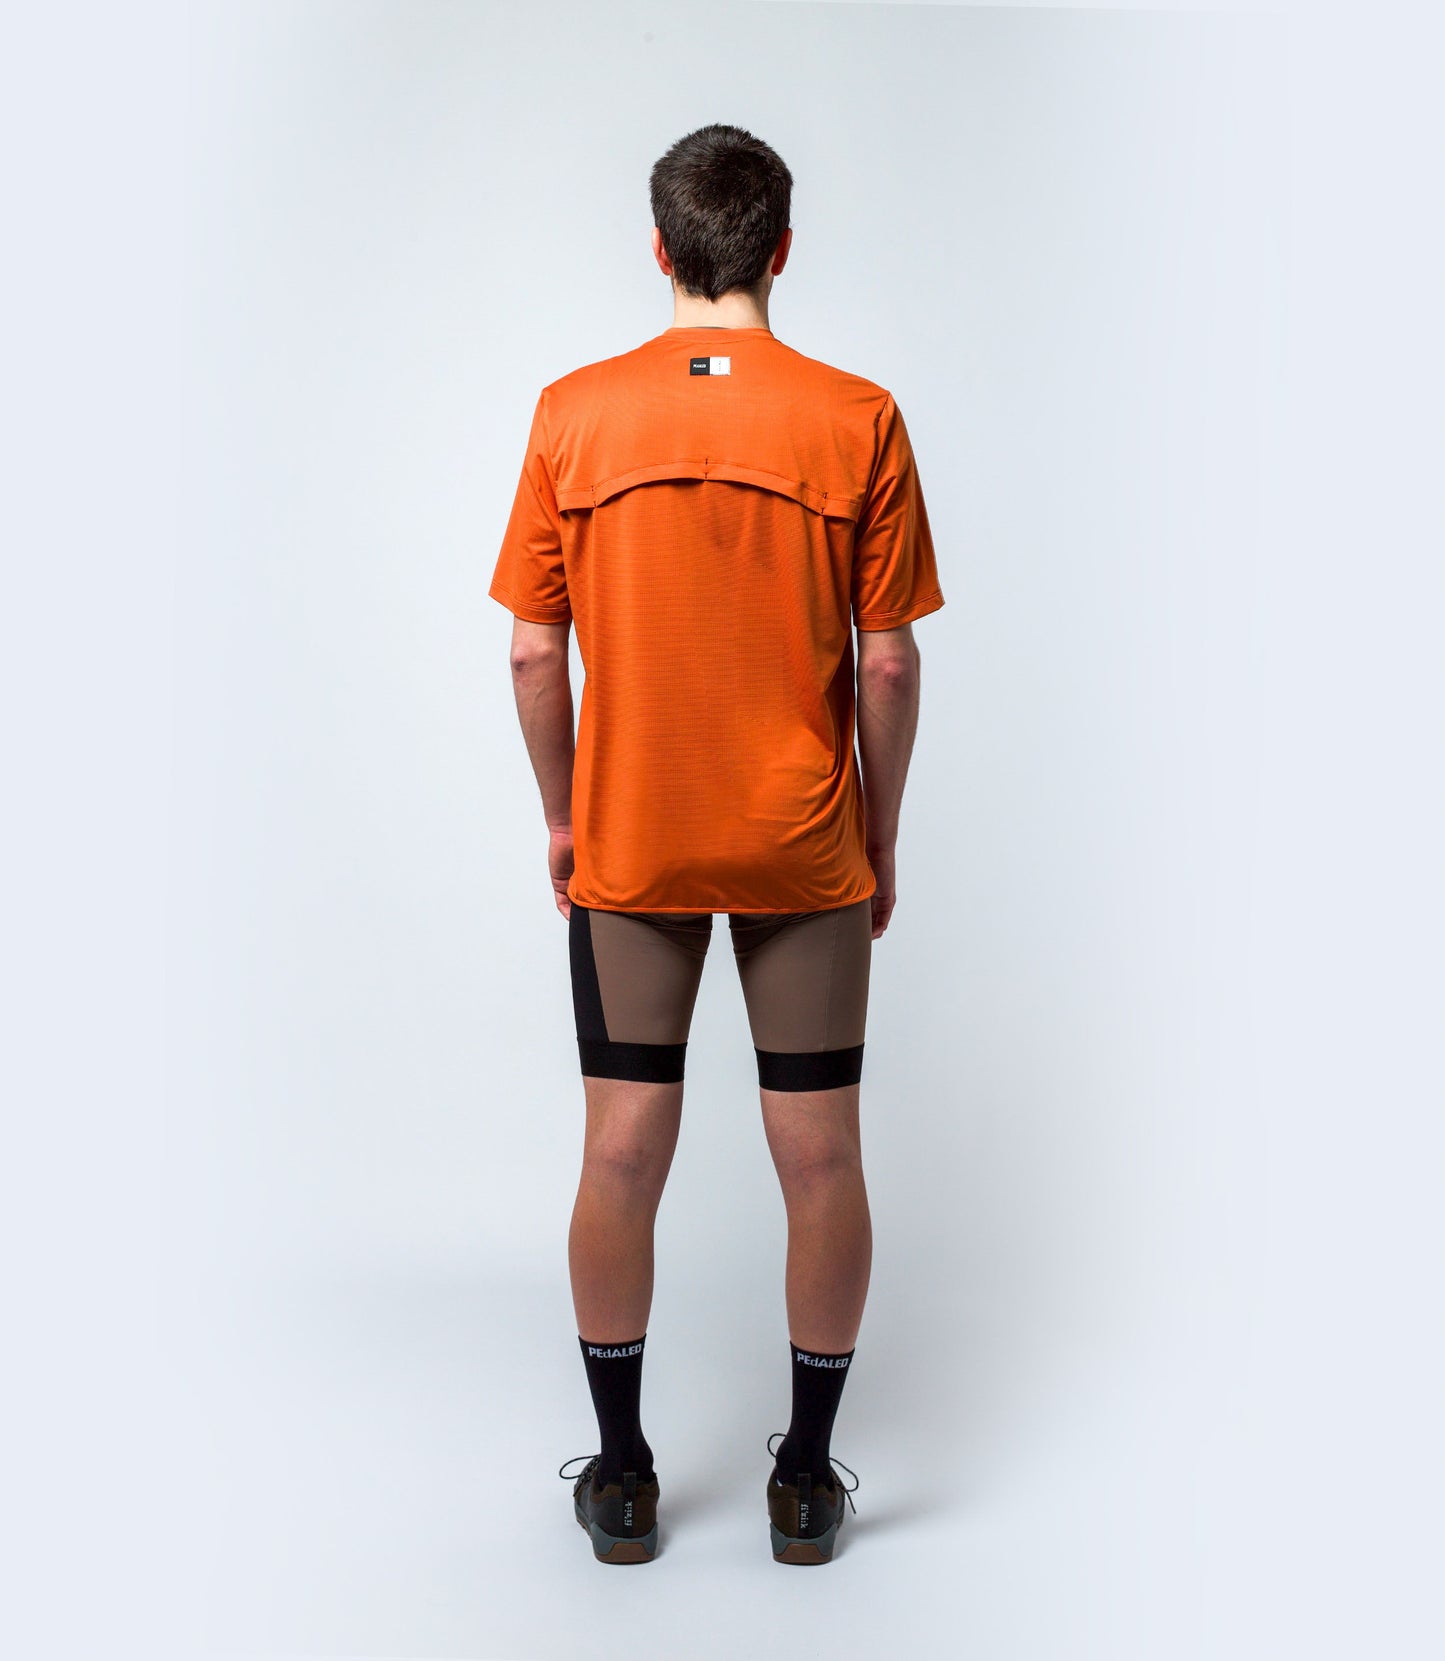 23STSJA0HPE_4_cycling gravel tech tee orange jary total body back pedaled